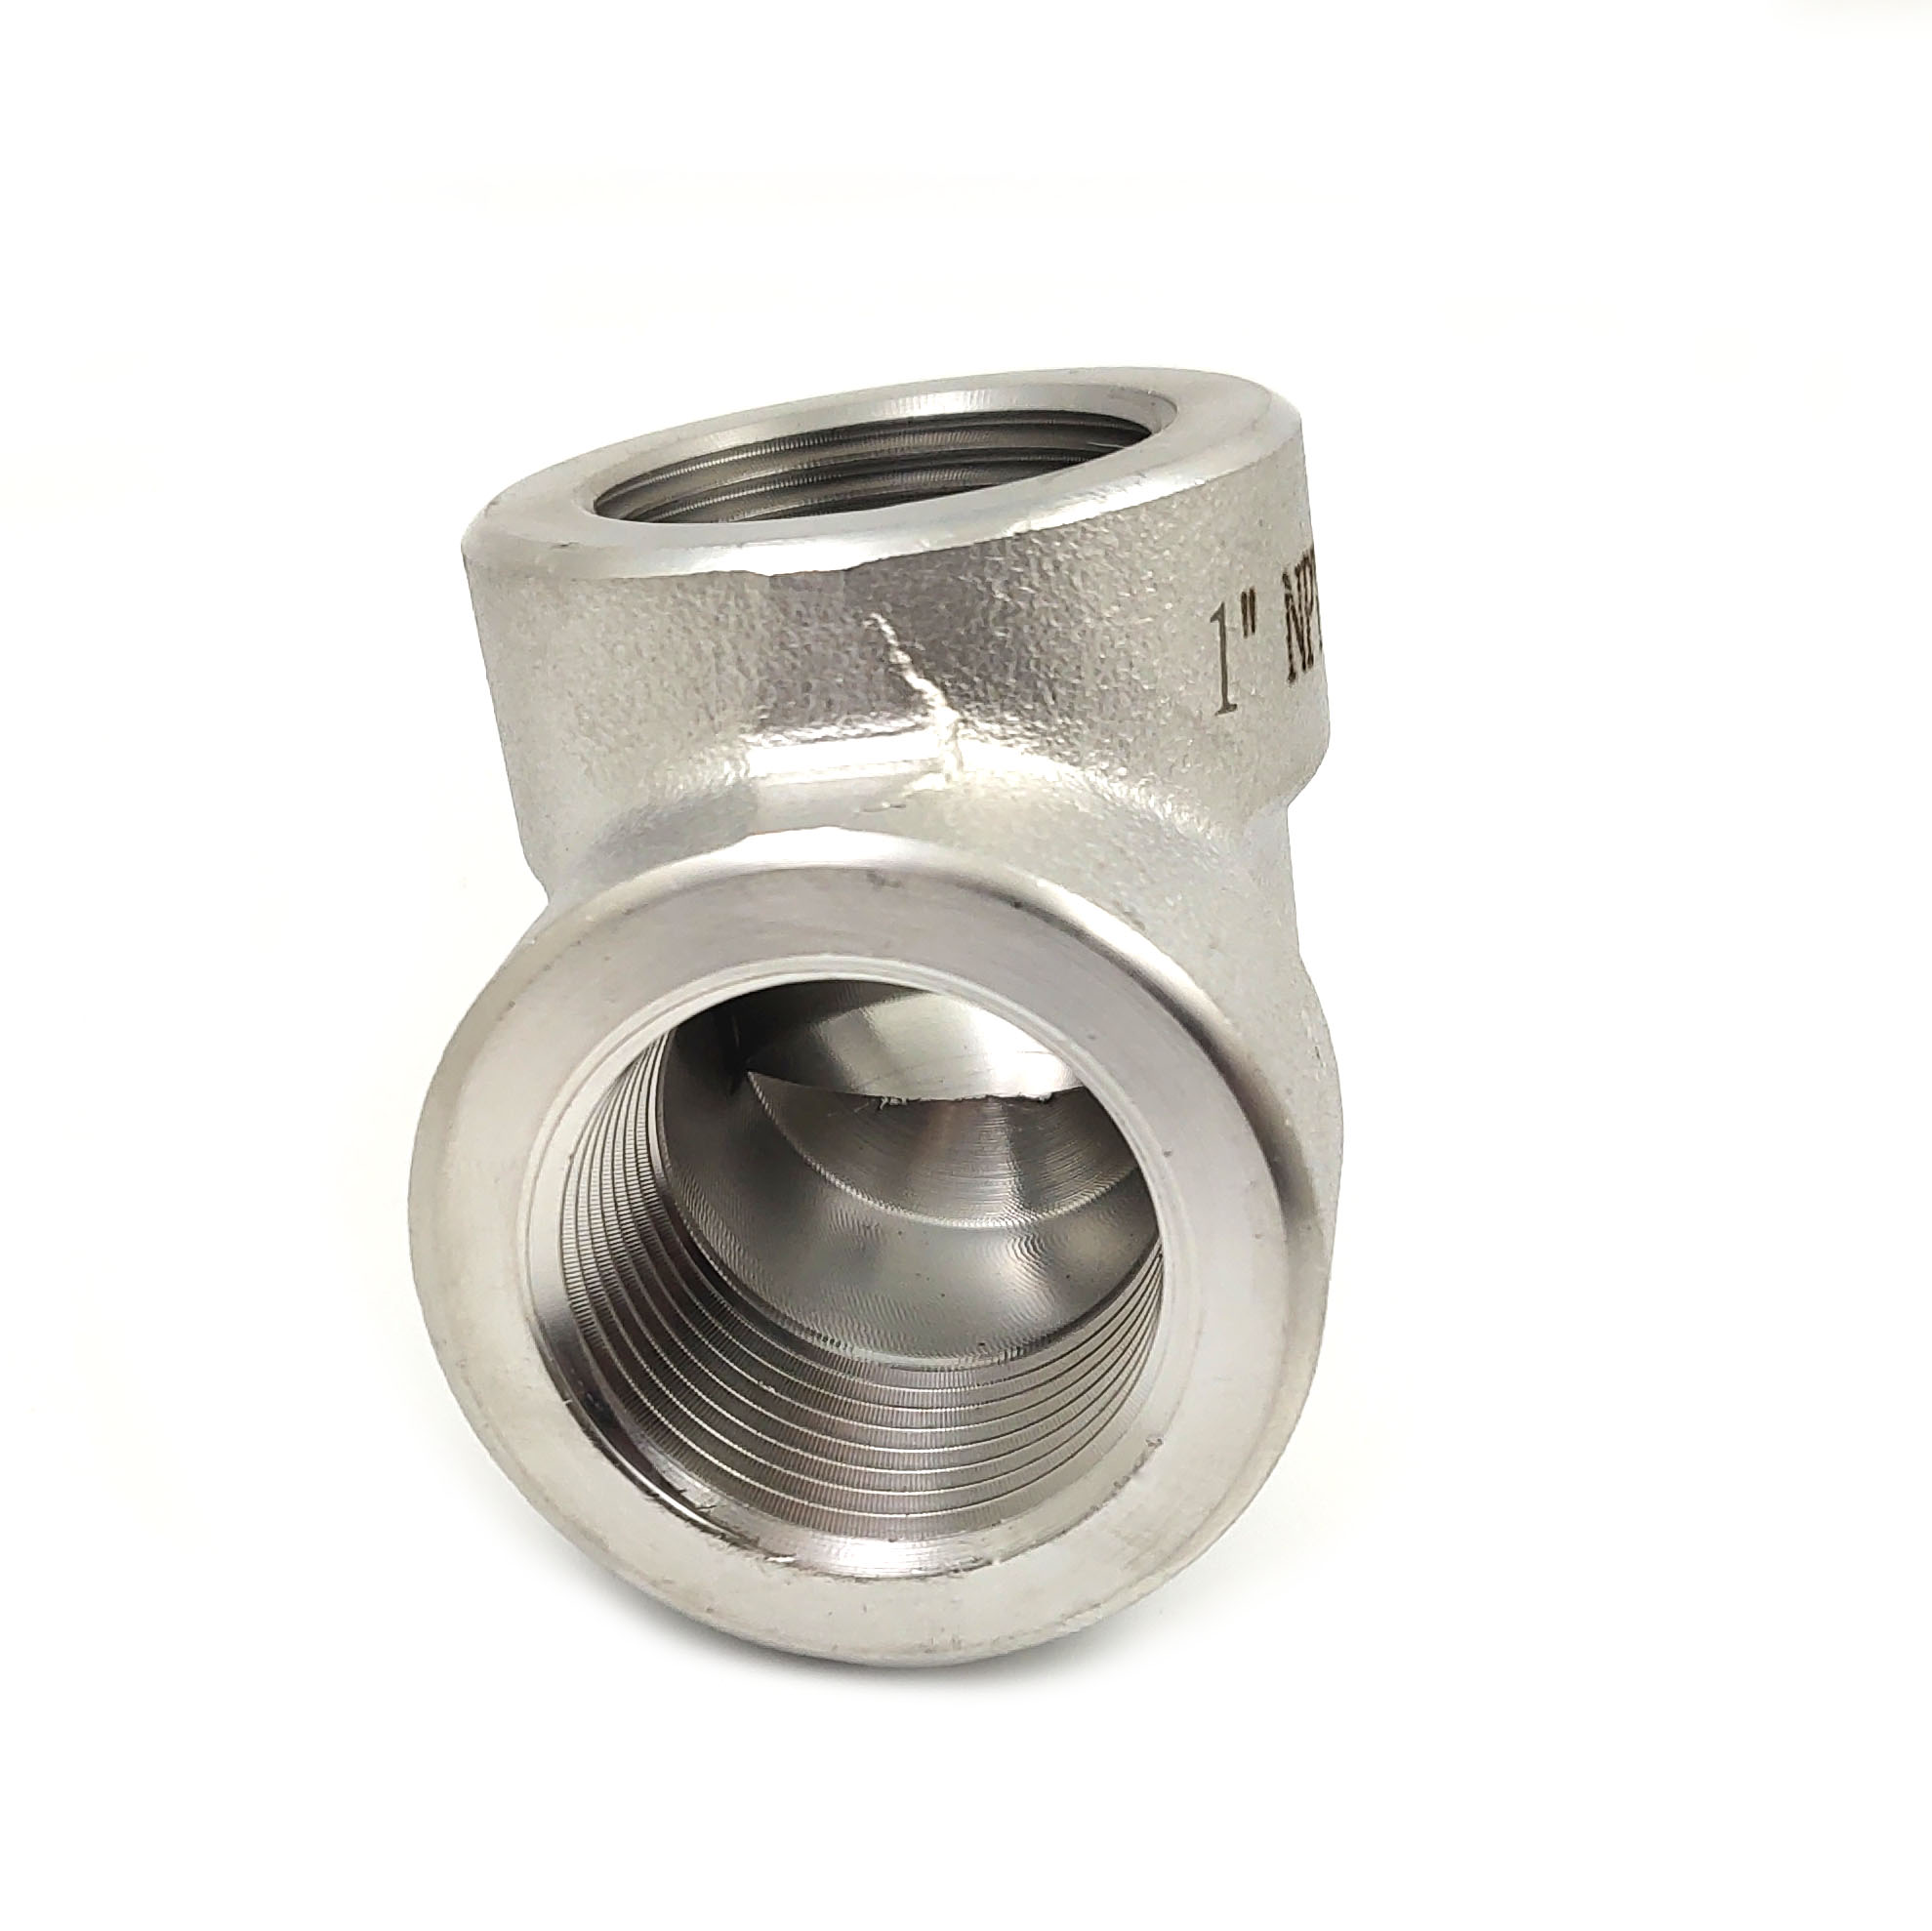 Stainless Steel 90 degree 3000 lb High Pressure Elbow